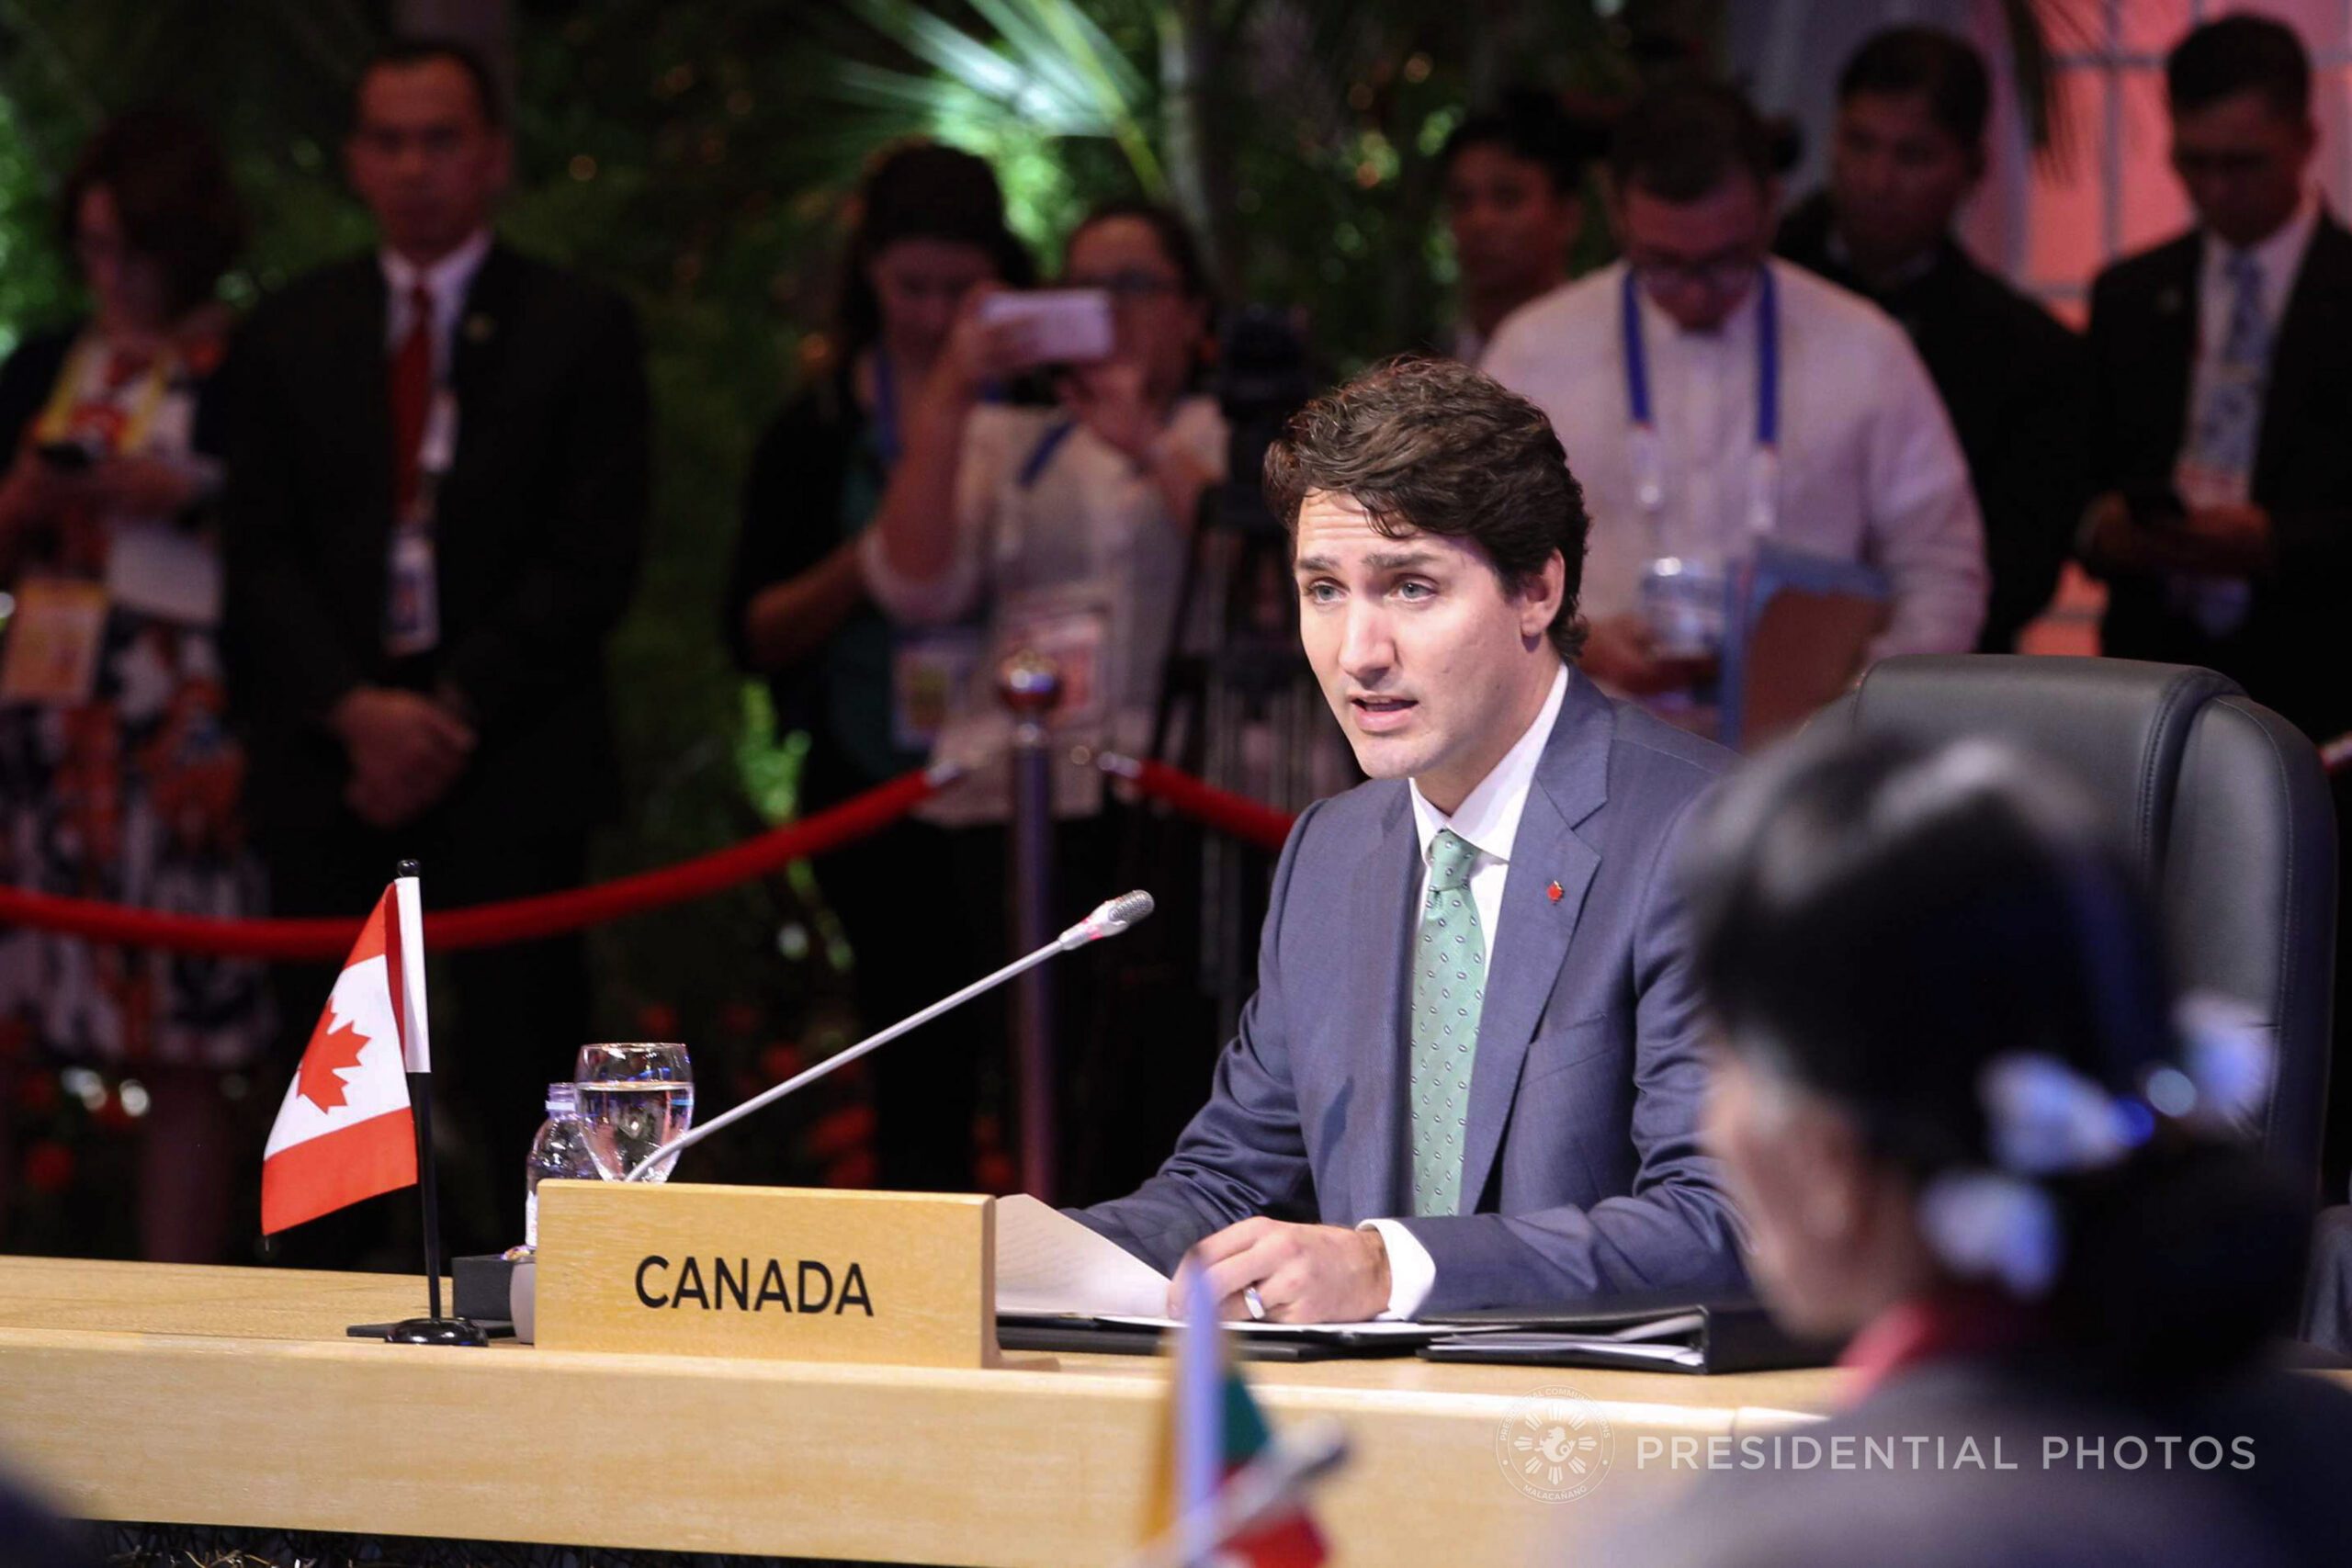 Canada’s Justin Trudeau says China uses detentions as political tool